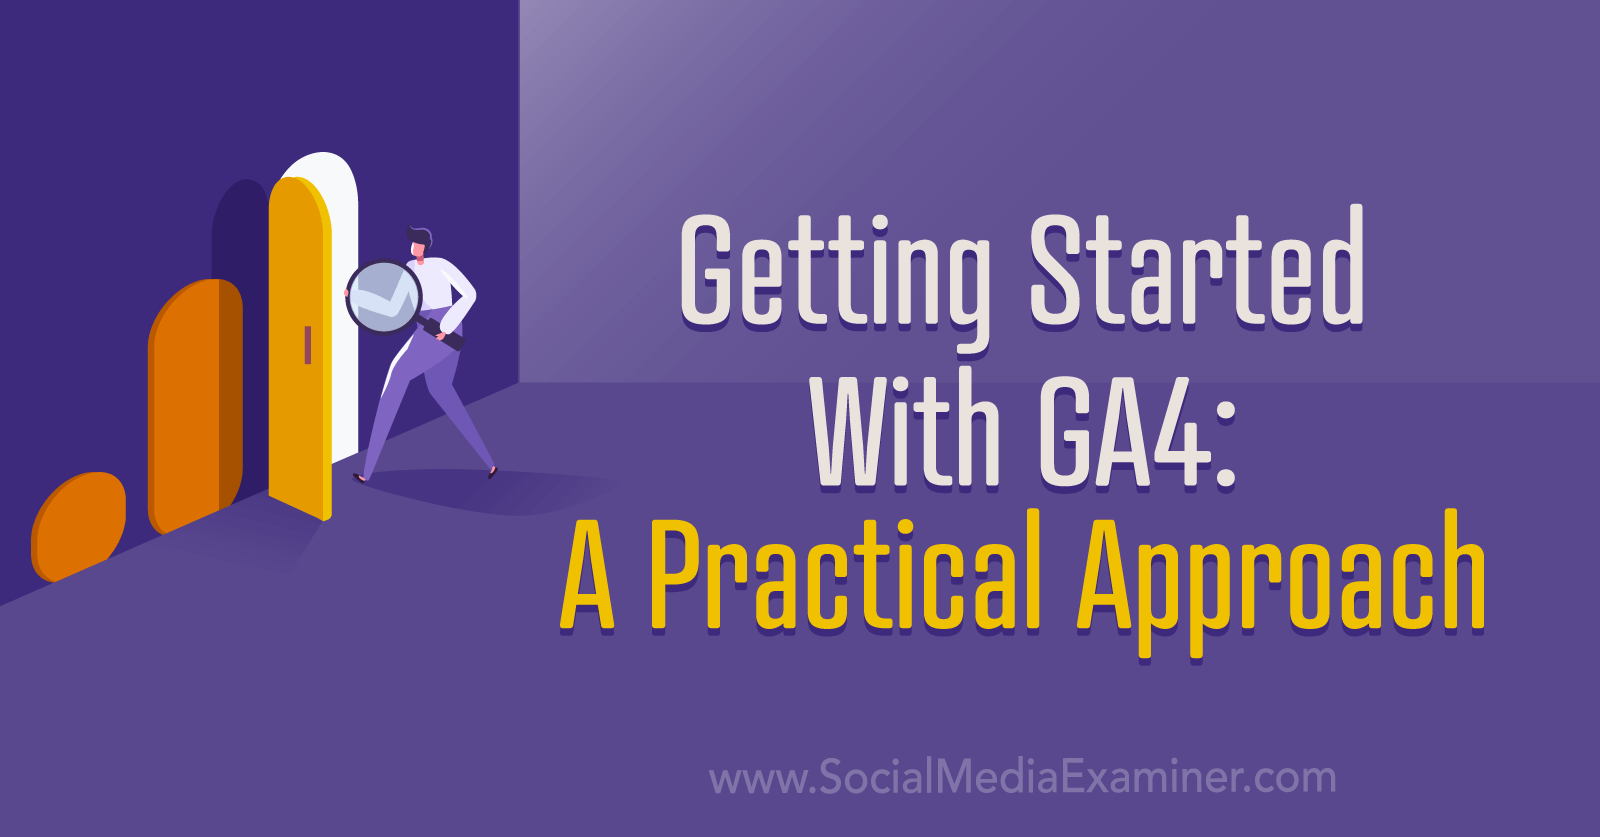 Getting Started With GA4: A Practical Approach by Social Media Examiner